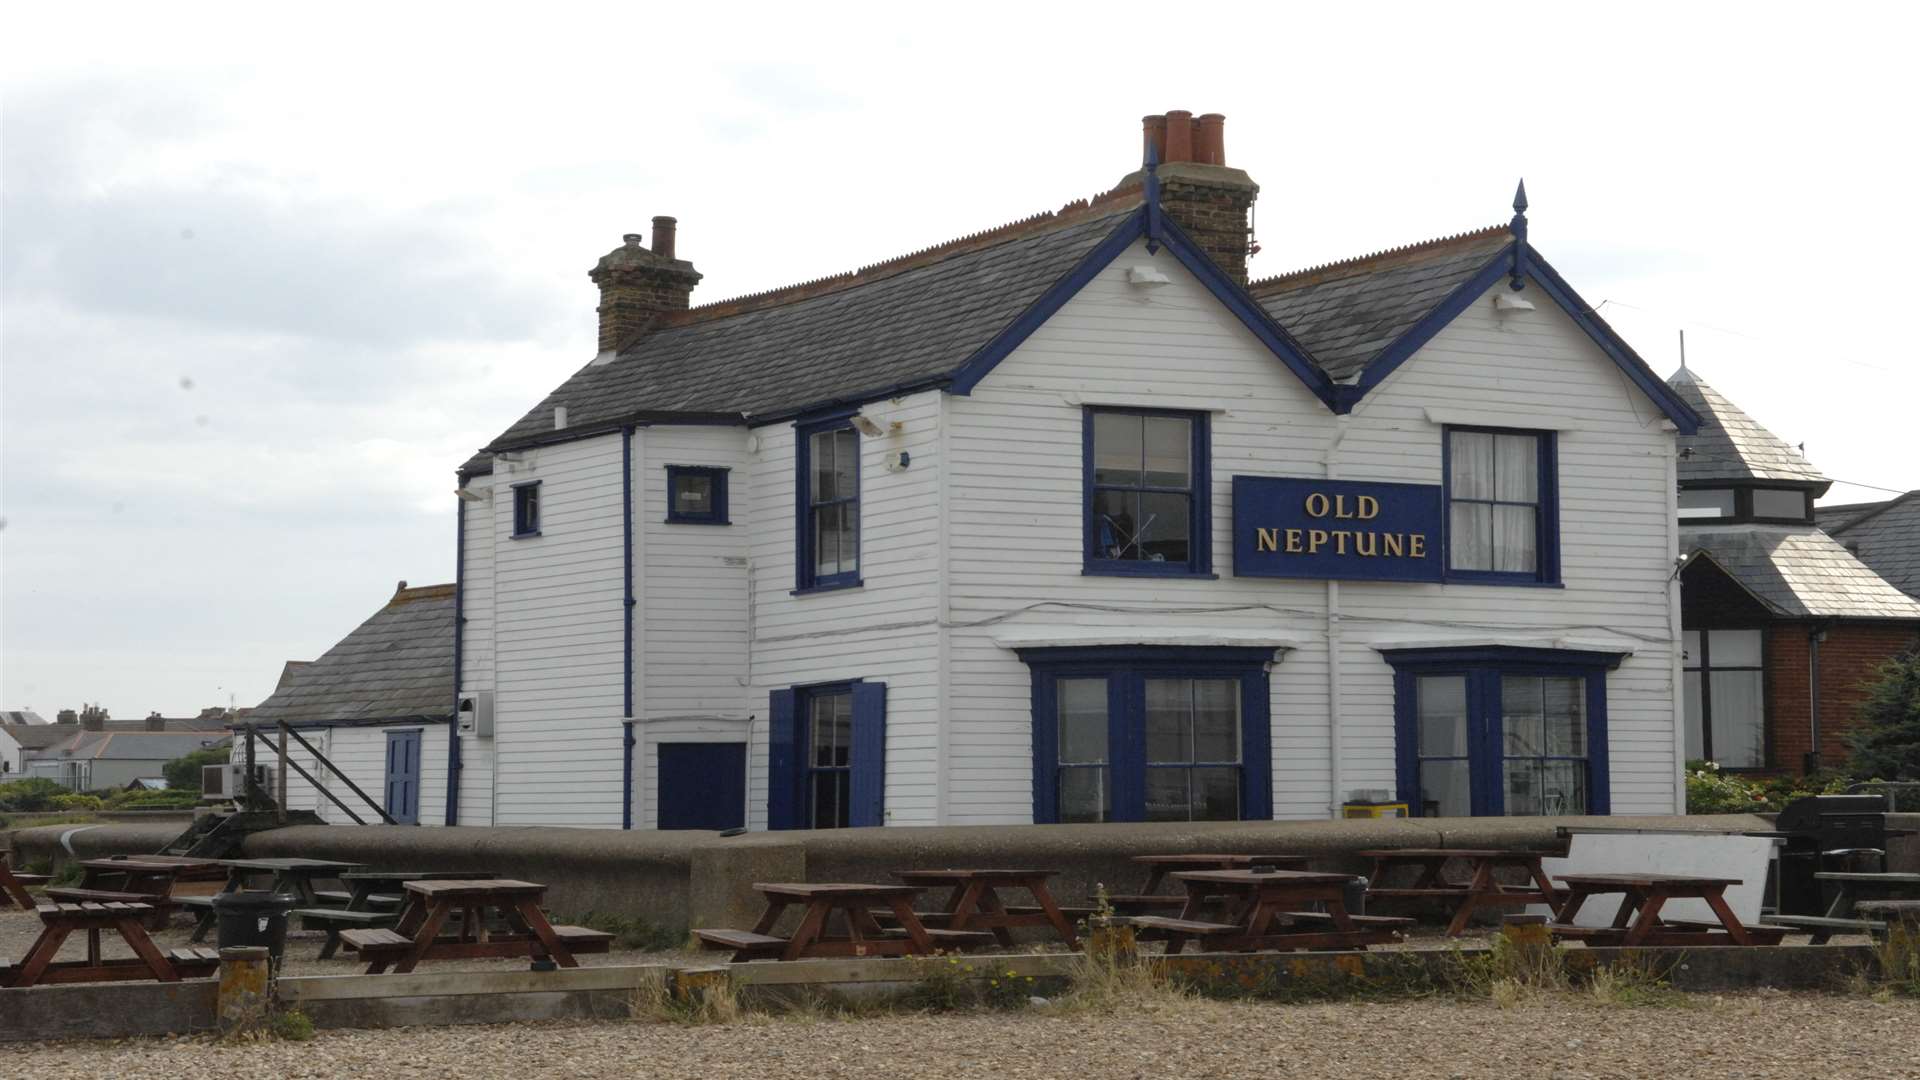 The Old Neptune pub, Whitstable